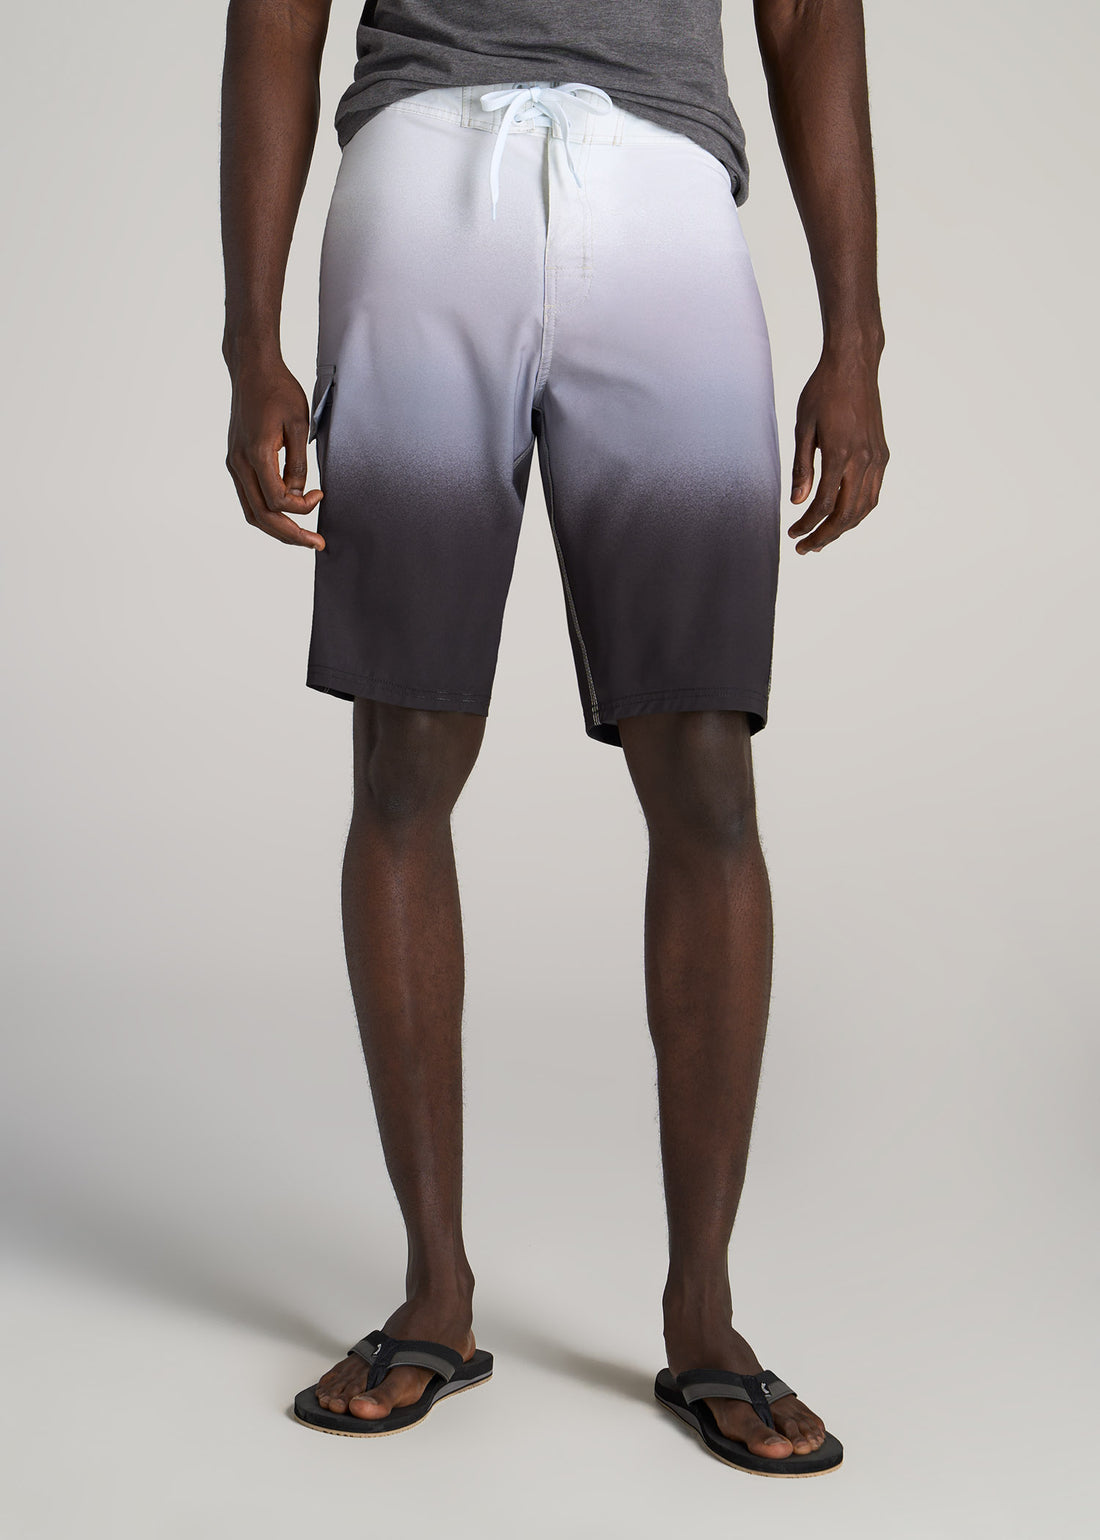 Tall man wearing white, grey and black ombre-colored board shorts.